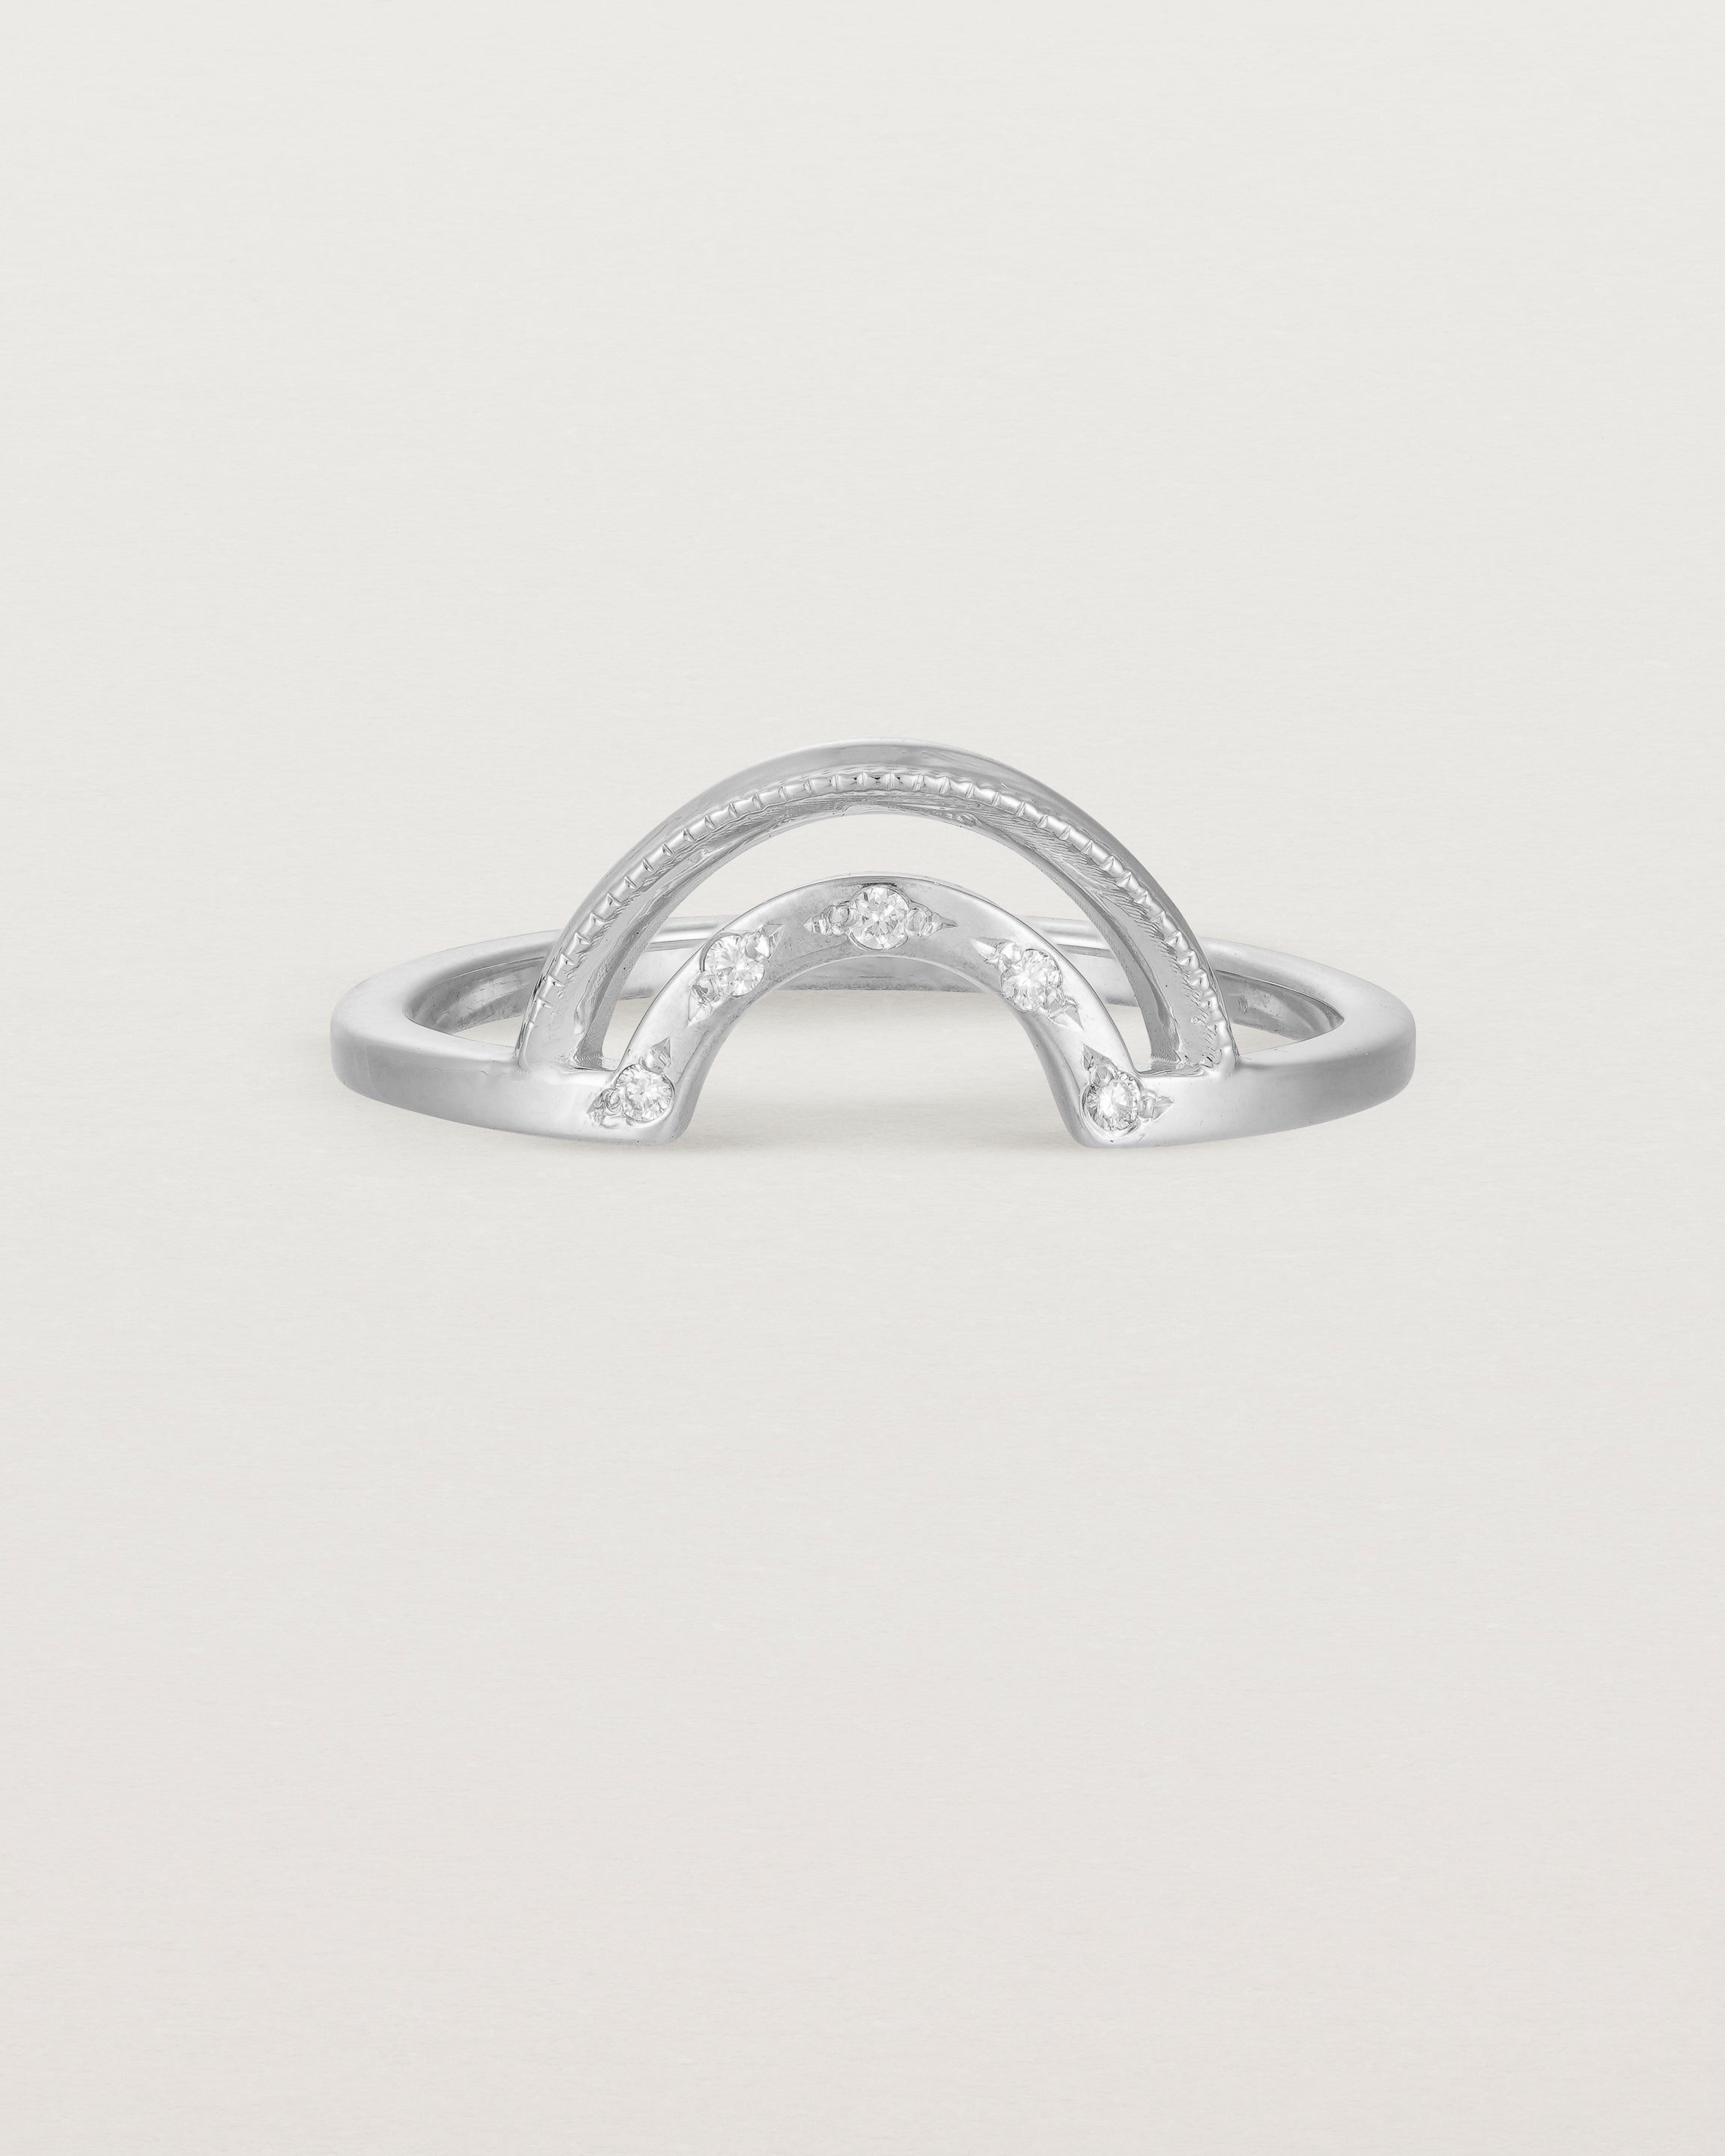 Fit two of a double arc crown ring with white diamonds adoring the inner arc - crafted in white gold.